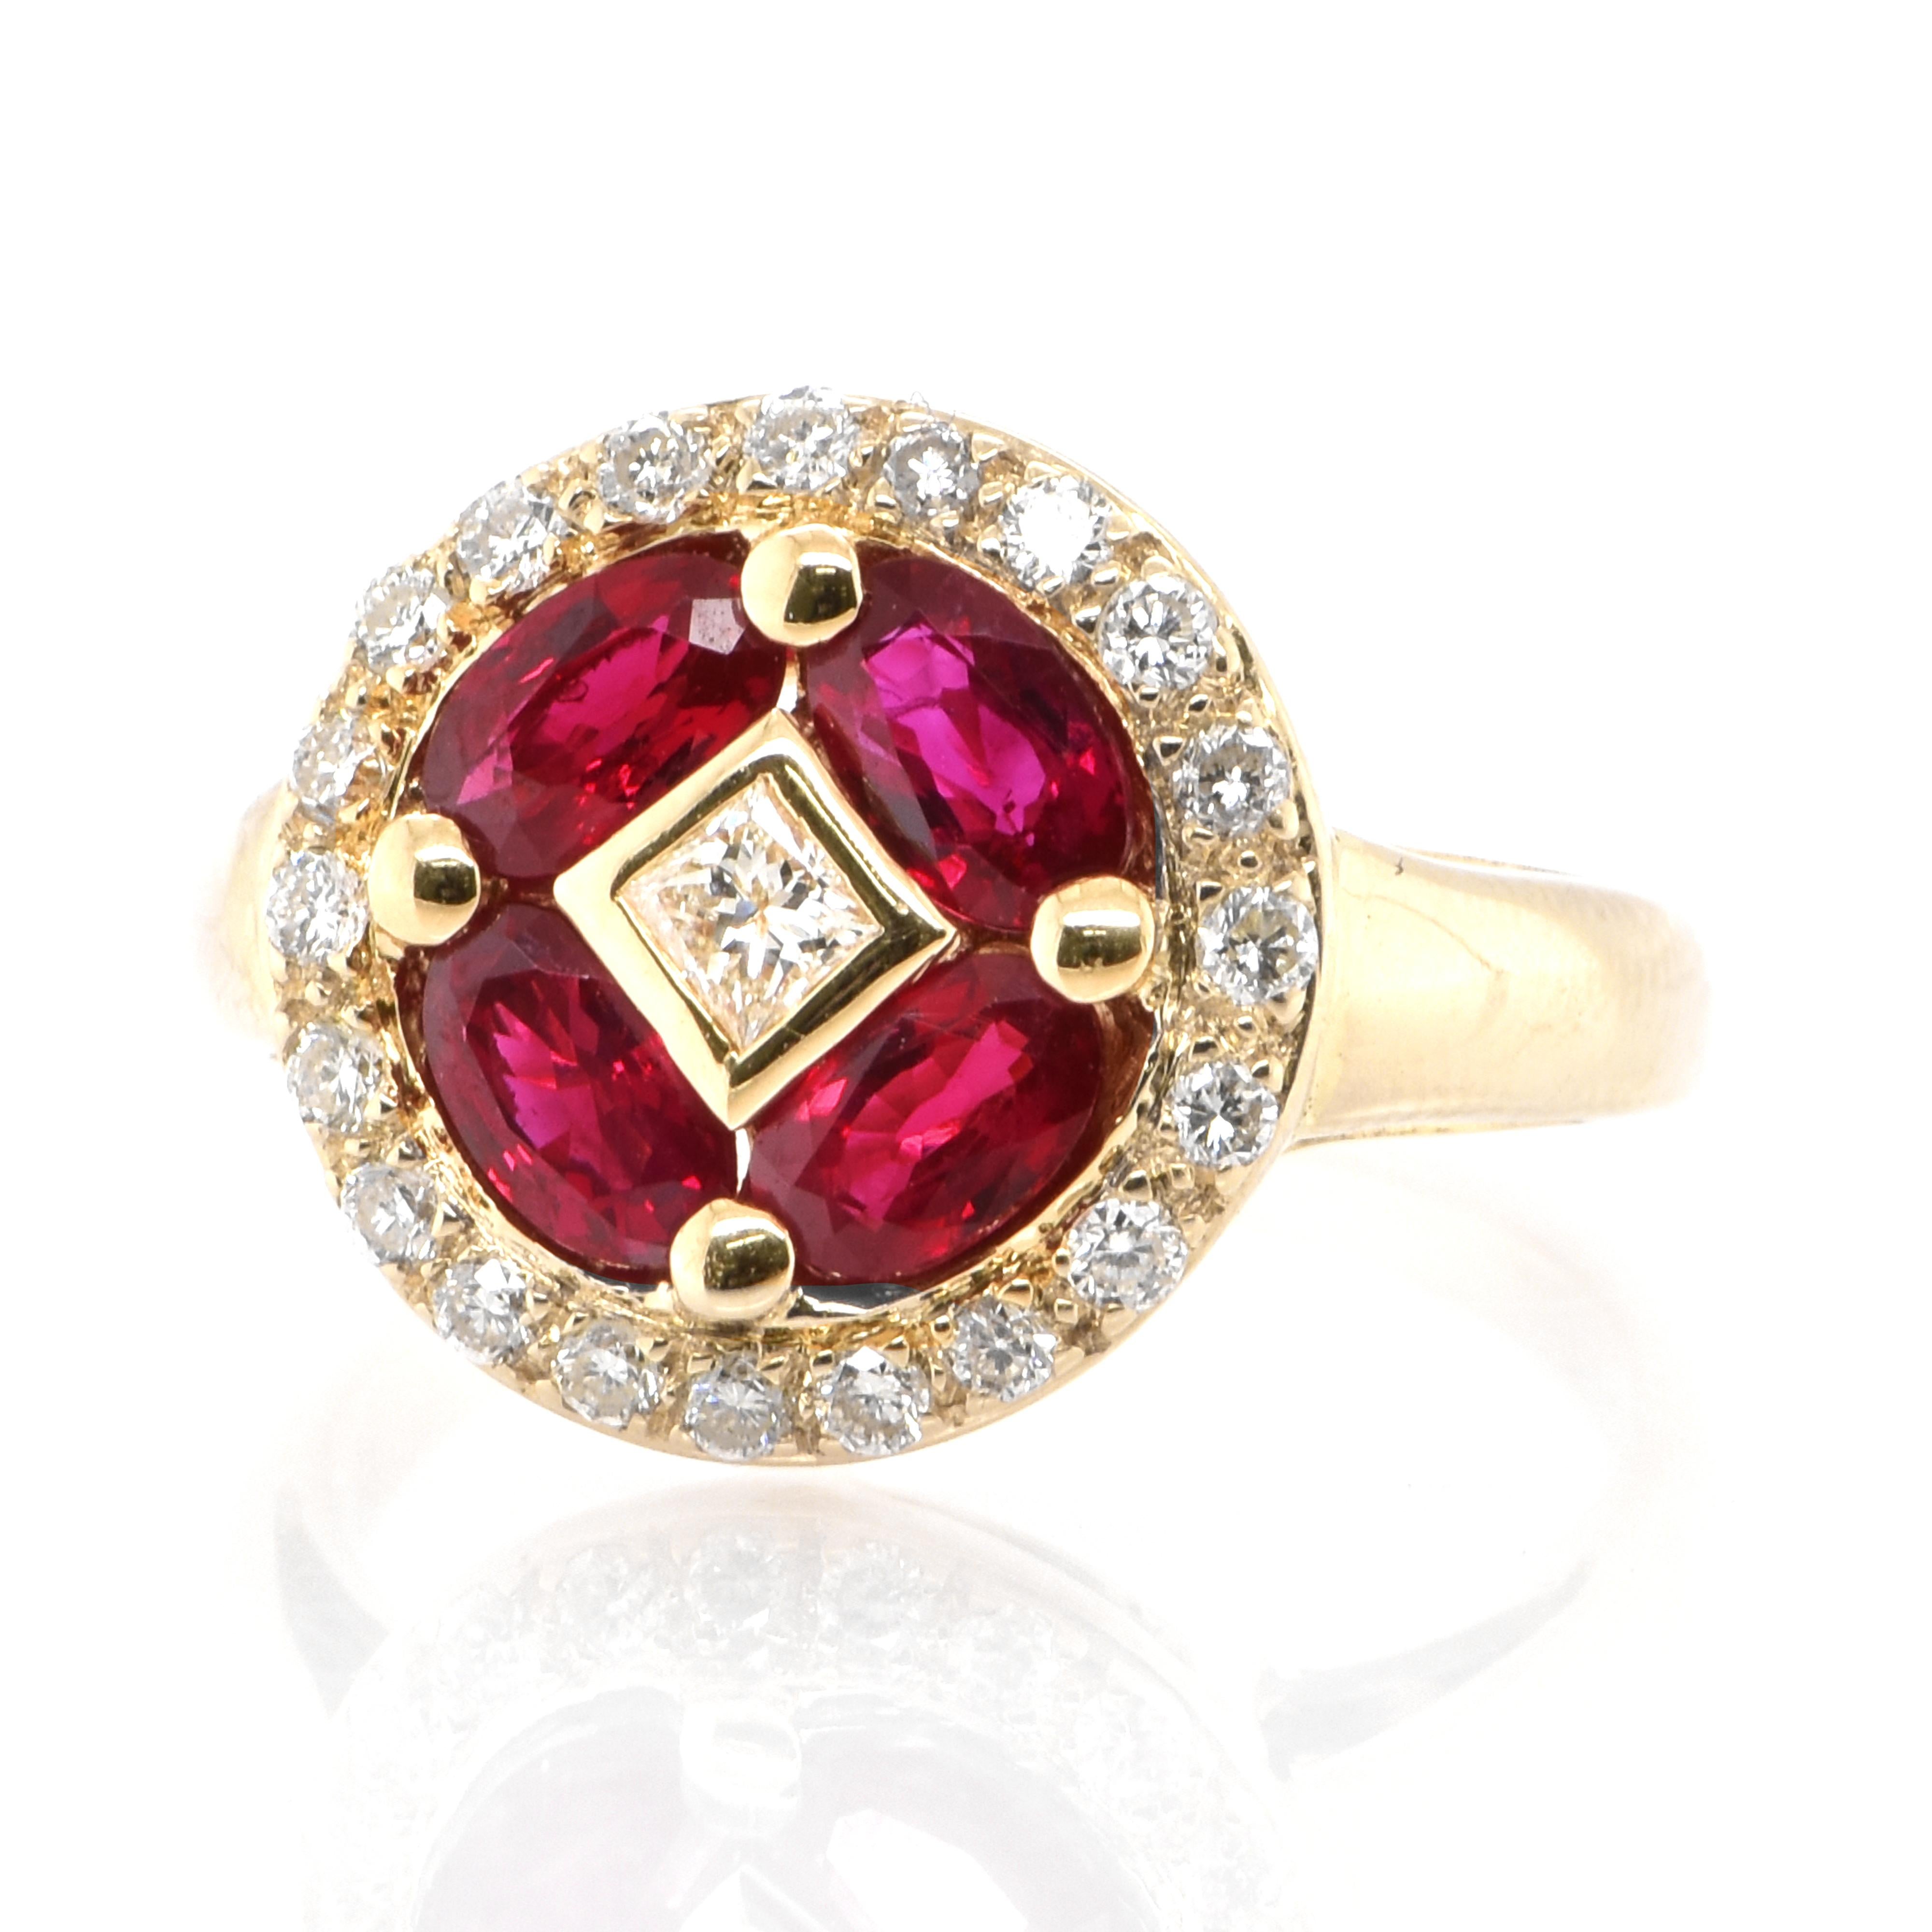 A beautiful ring set in Platinum featuring a 1.34 Carat Natural Ruby and 0.32 Carat Diamonds. Rubies are referred to as 